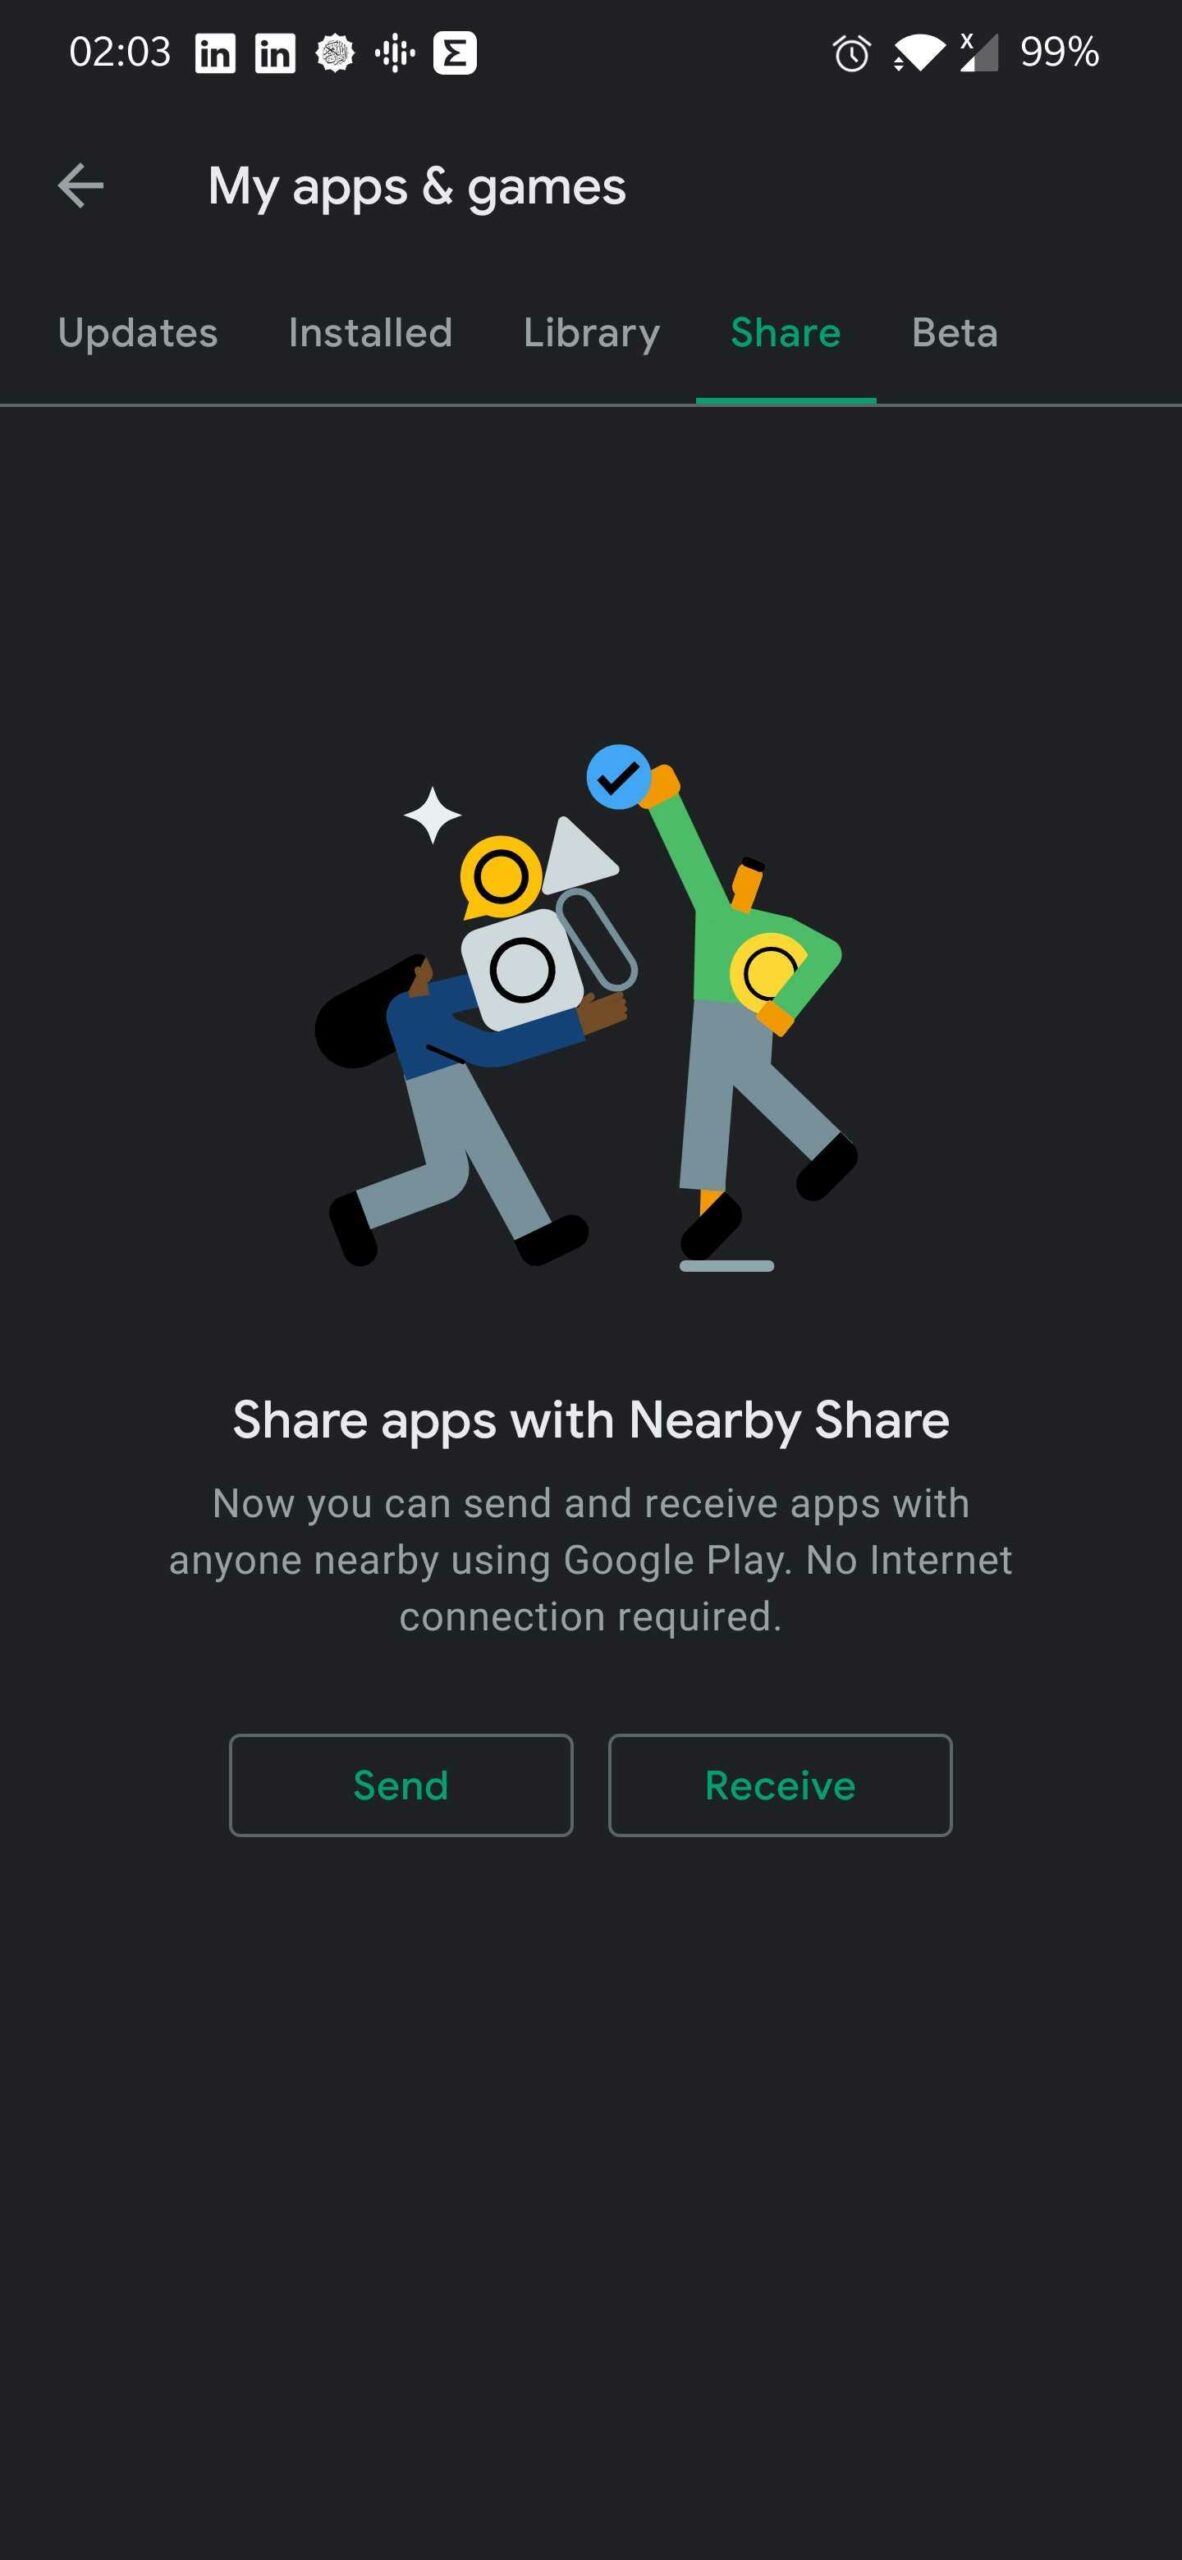 Share apps with Nearby Share